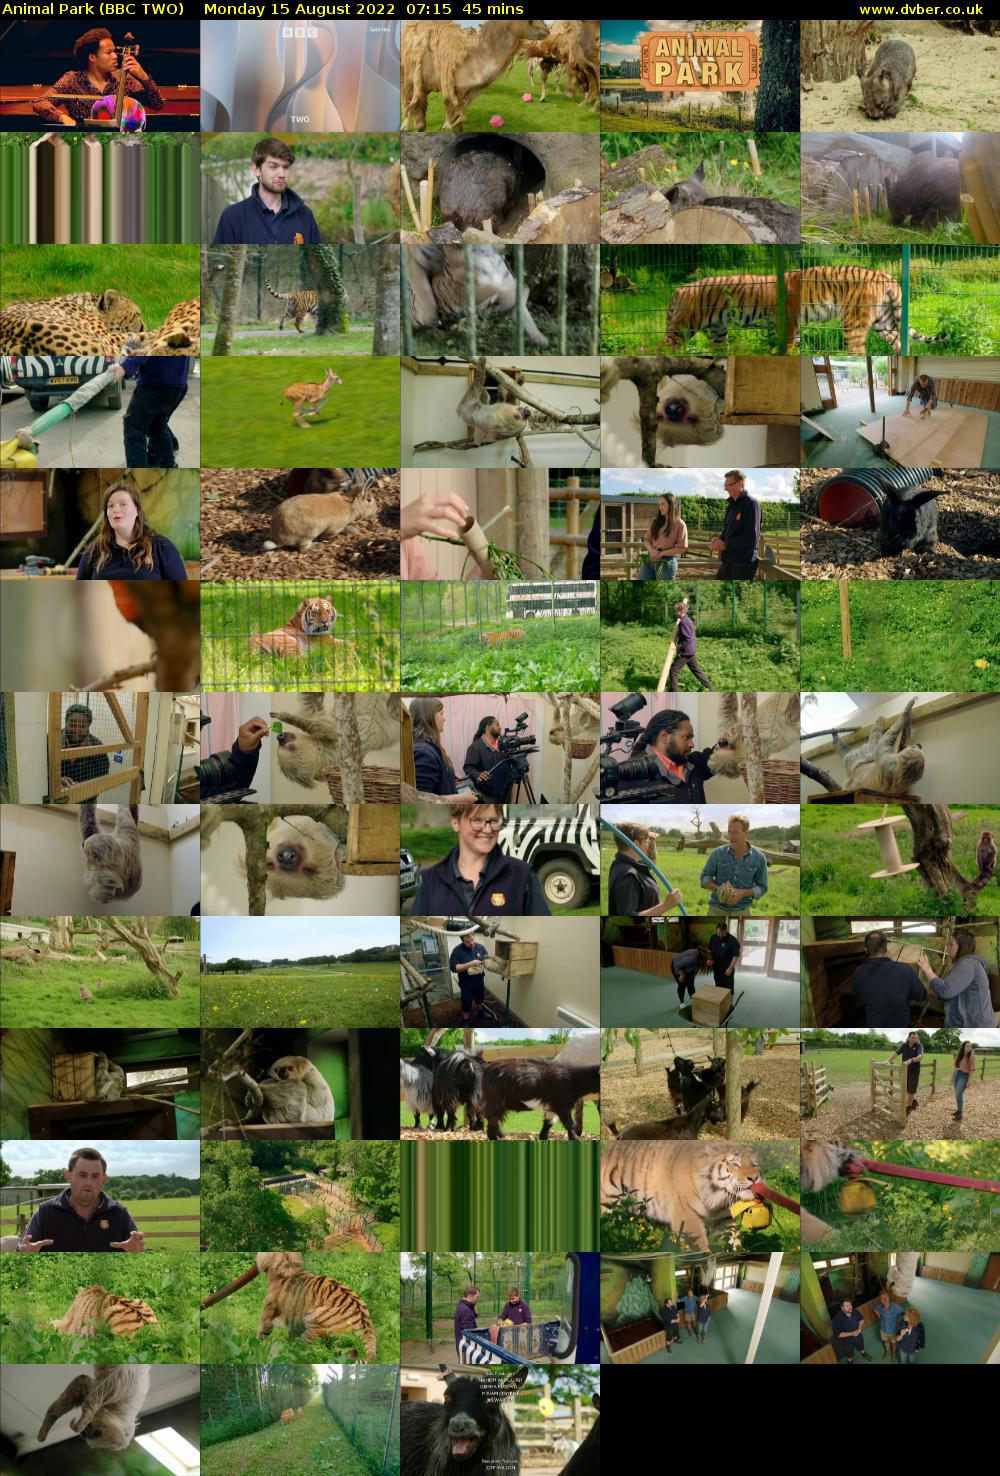 Animal Park (BBC TWO) Monday 15 August 2022 07:15 - 08:00